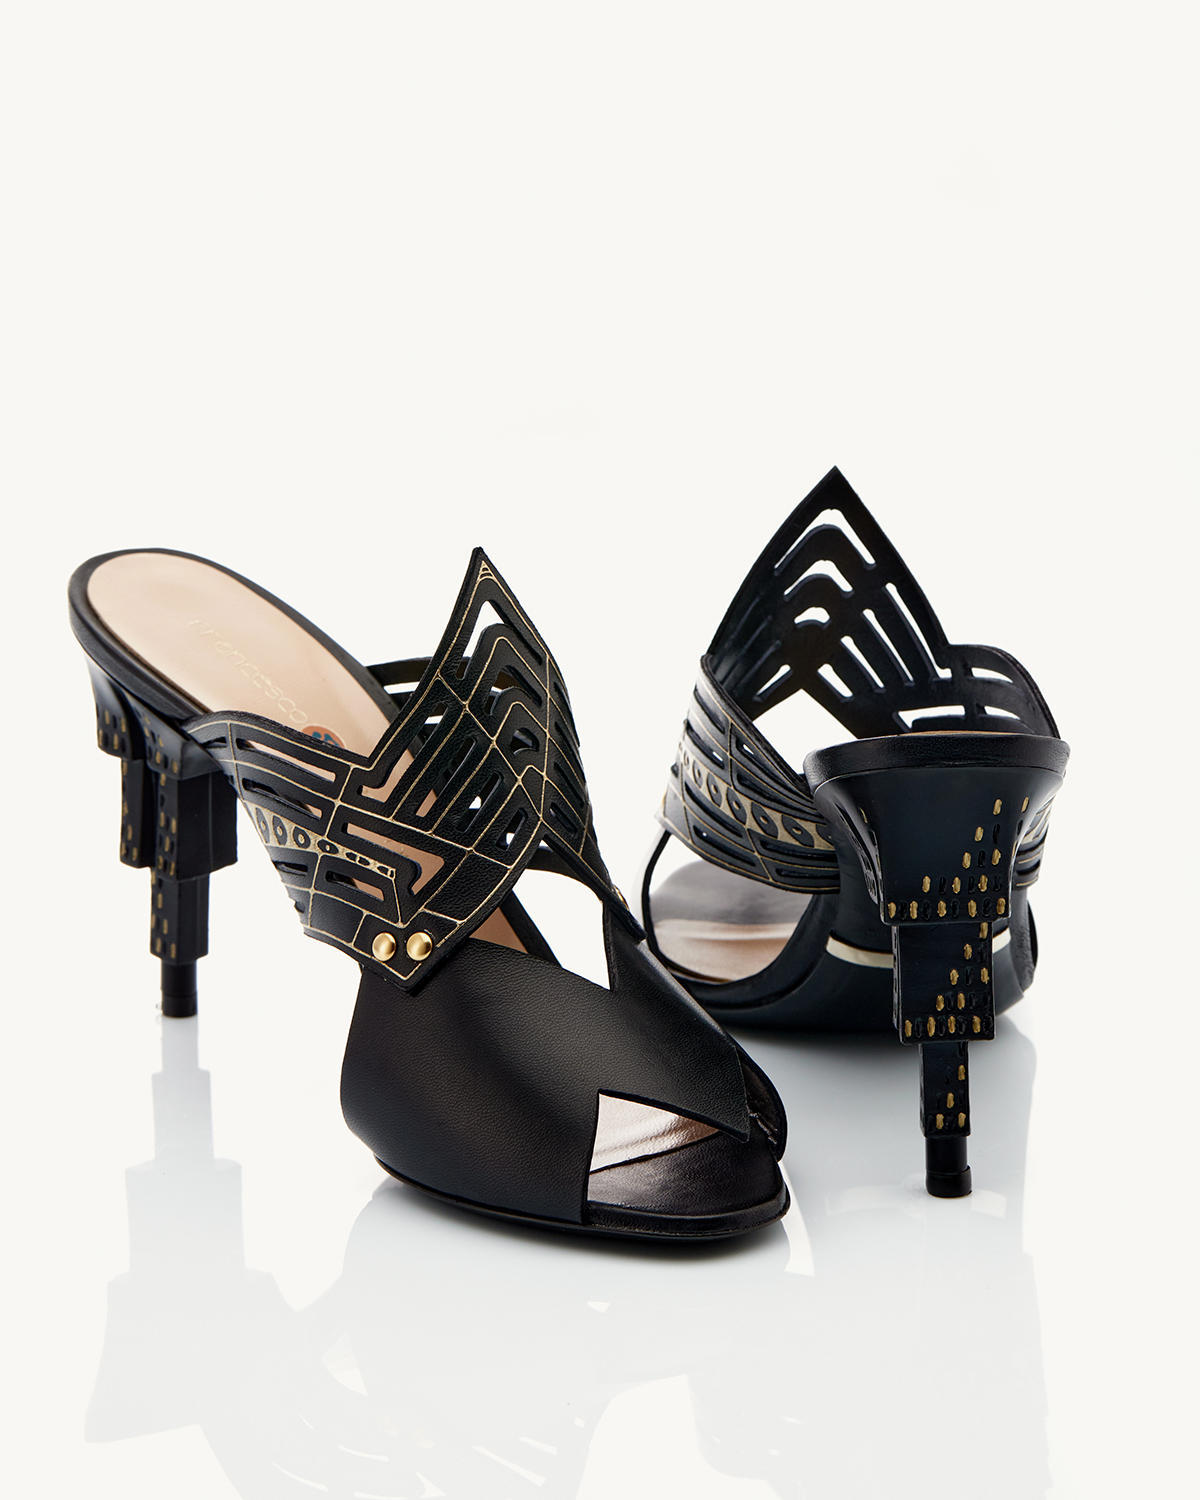 Sky 90 heel sandal in black nappa leather with relief Decò pattern in gold foil Francesco Lanzoni shoes